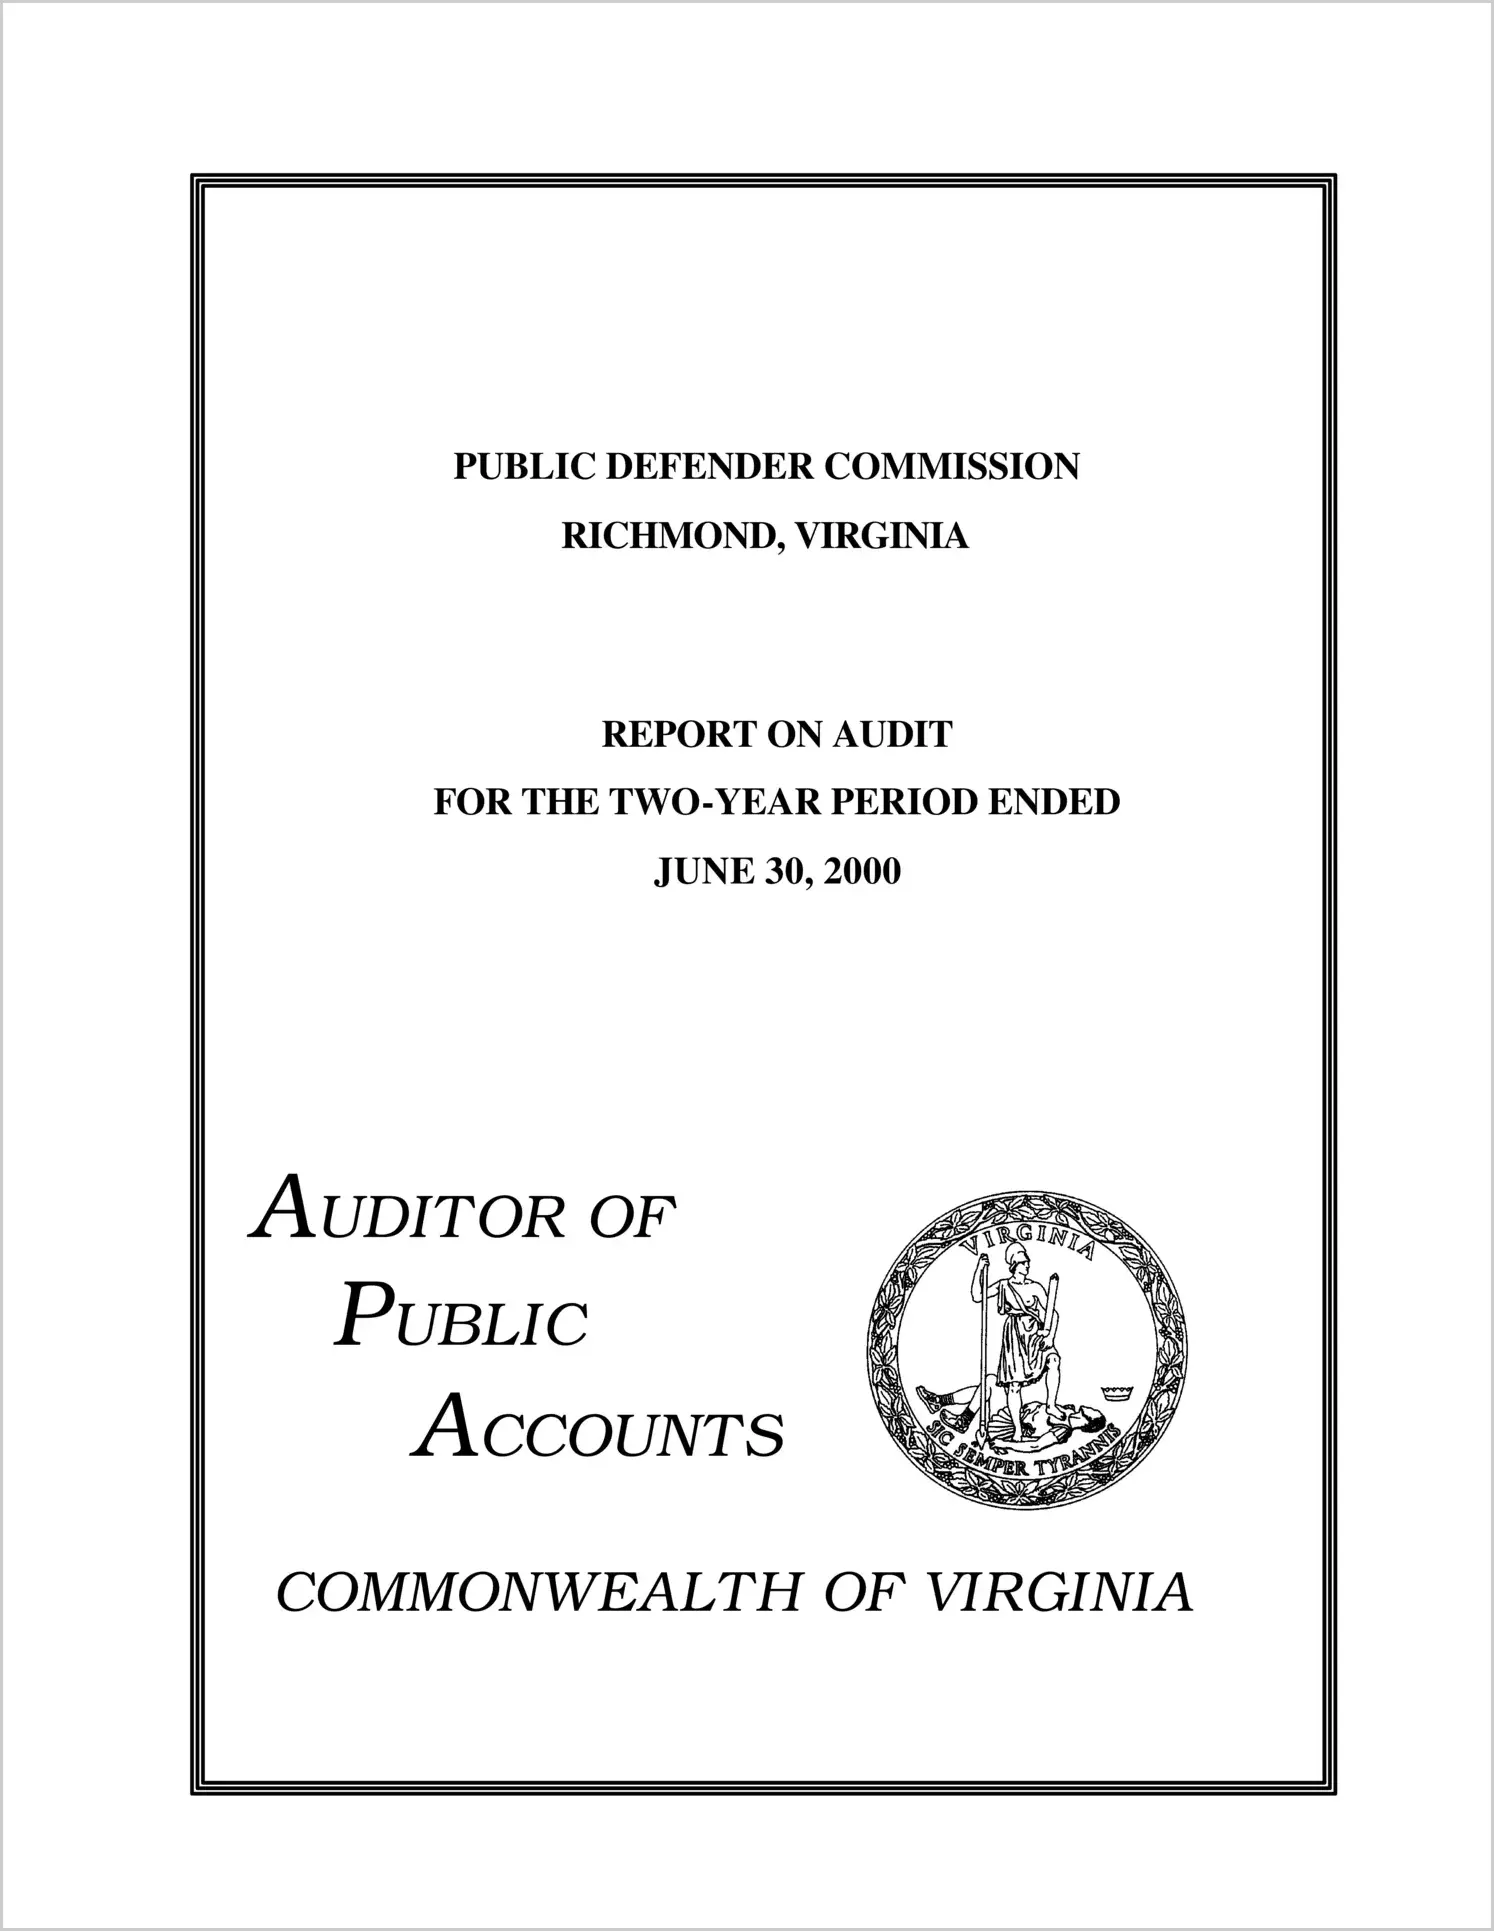 Public Defender Commission for the two-year period ended June 30, 2000